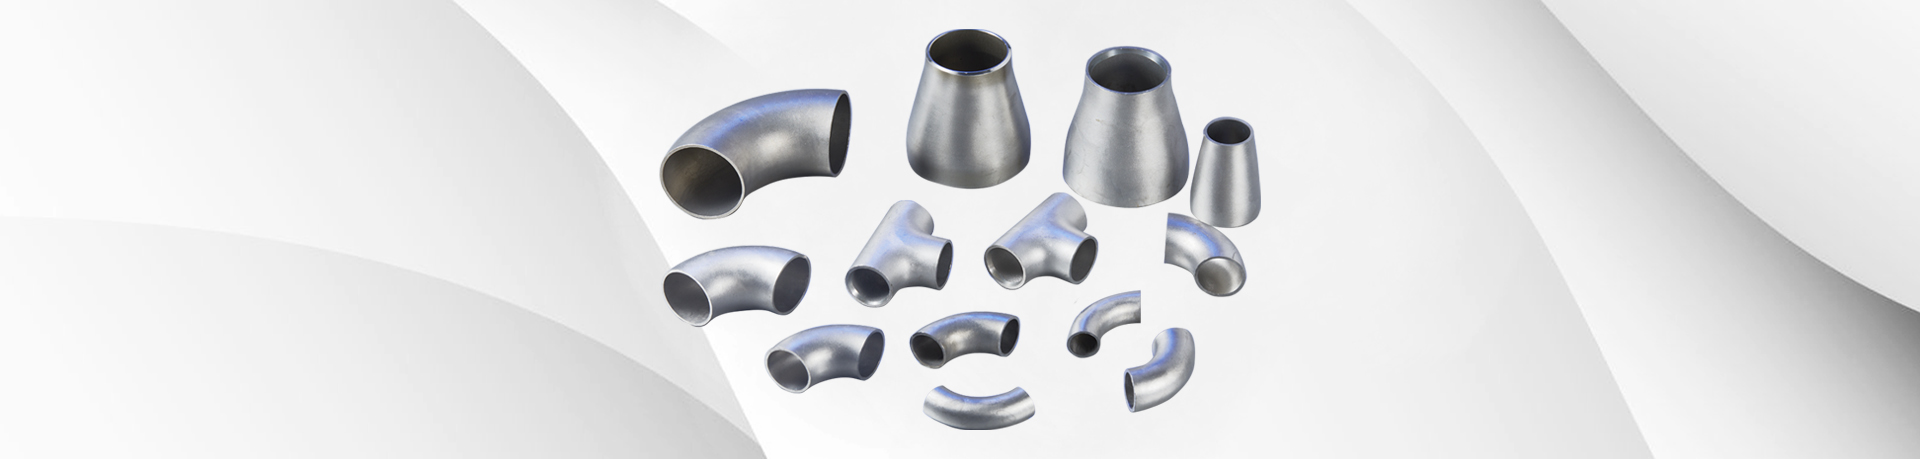 Stainless Steel Weld Elbow